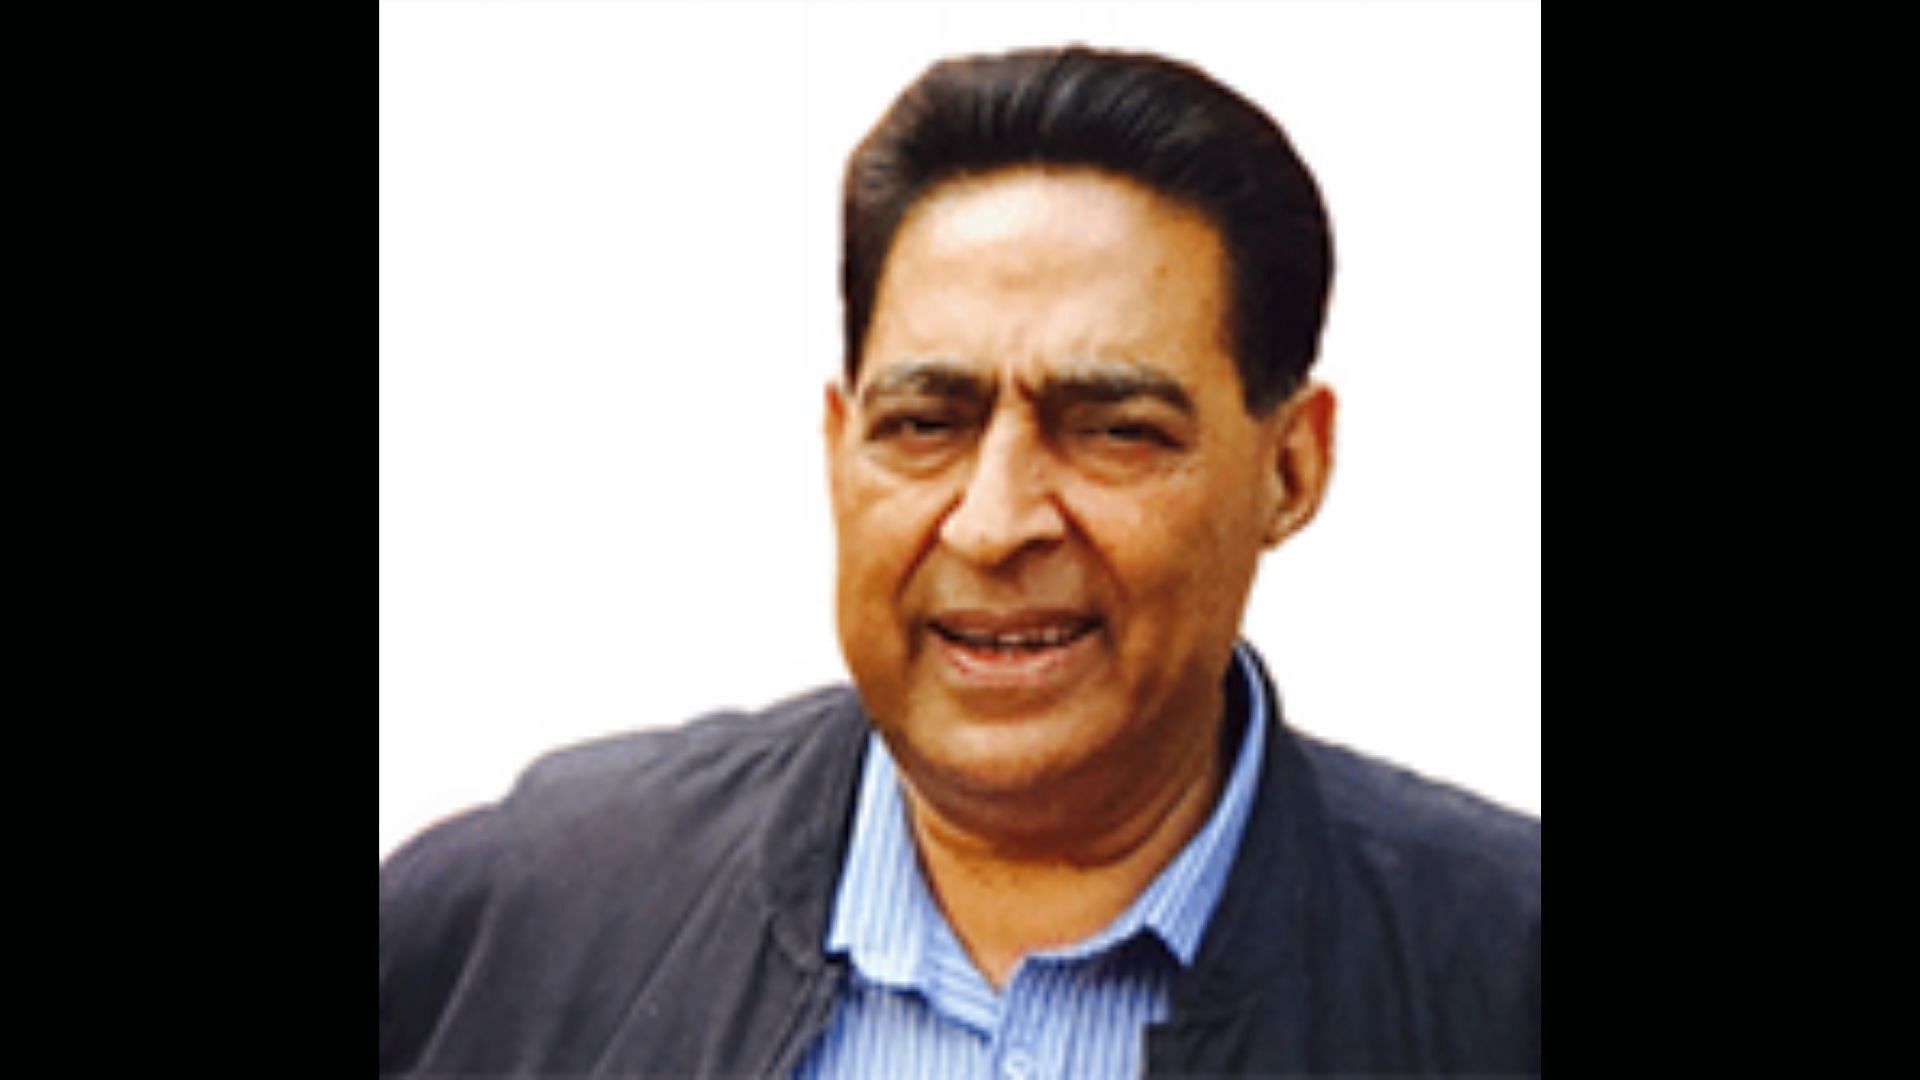 The Congress has appointed Subhash Chopra as its new Delhi Unit Chief.